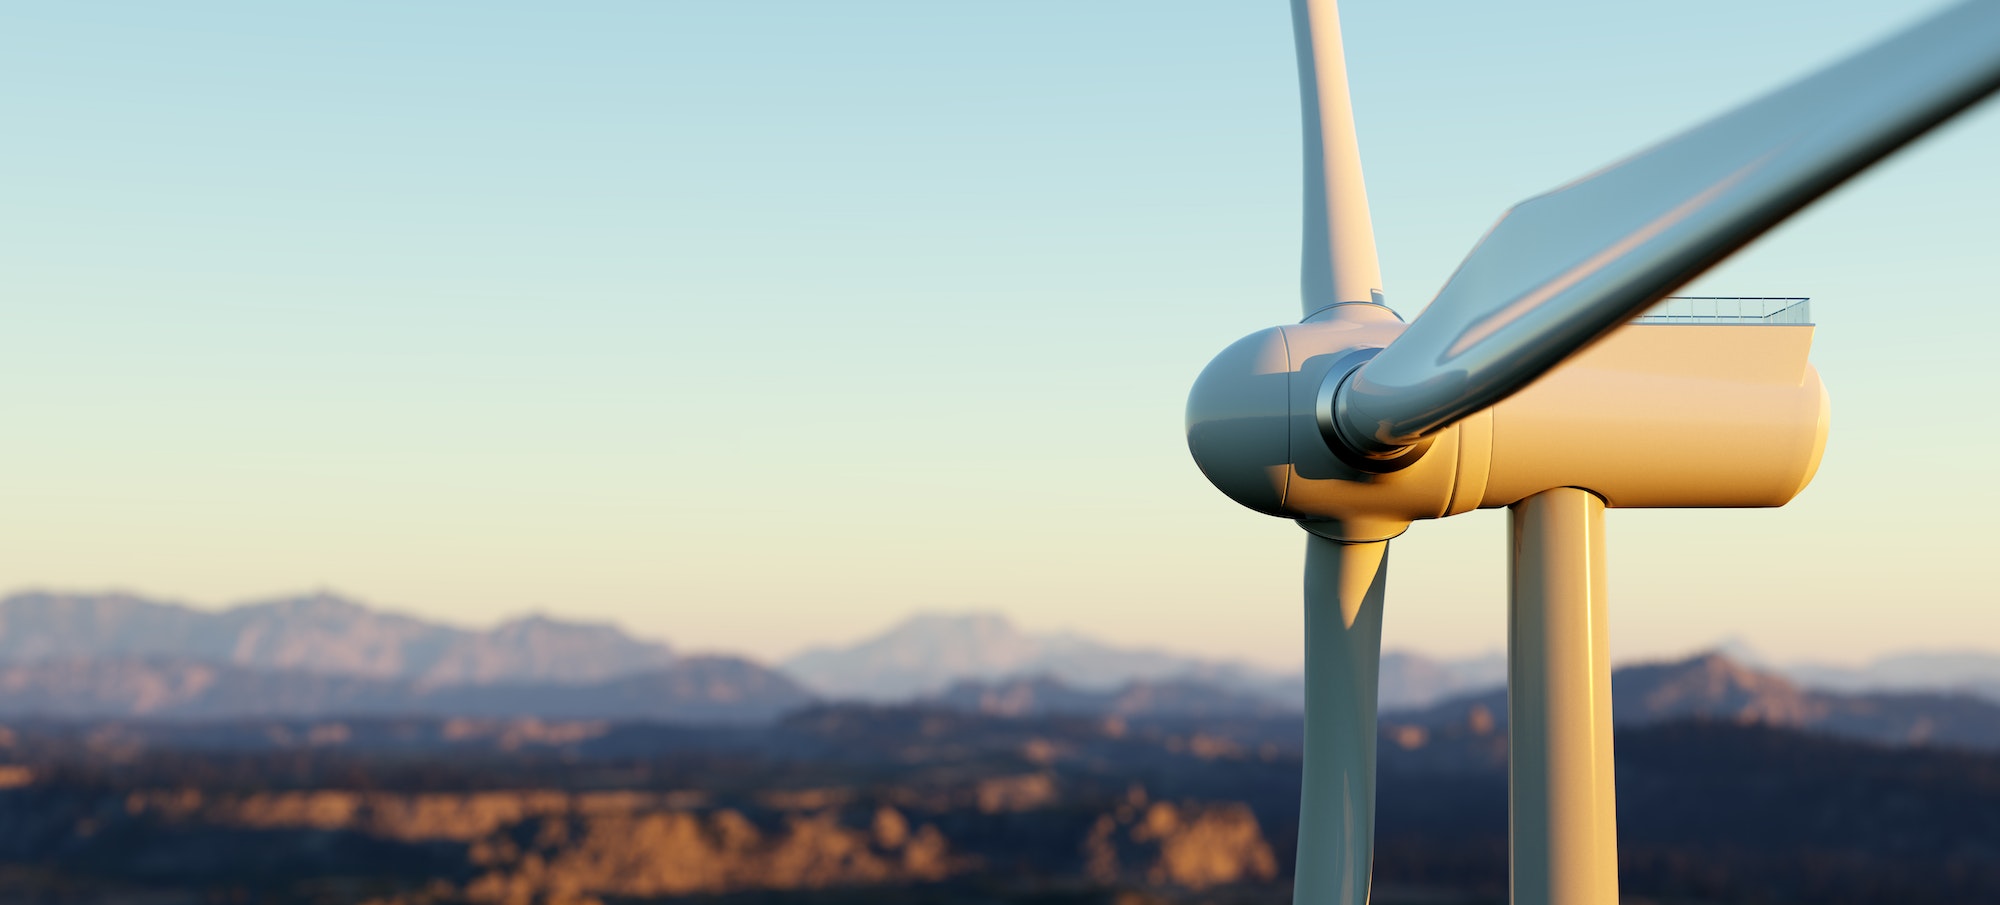 Wind turbine close up against a backdrop of rolling hills